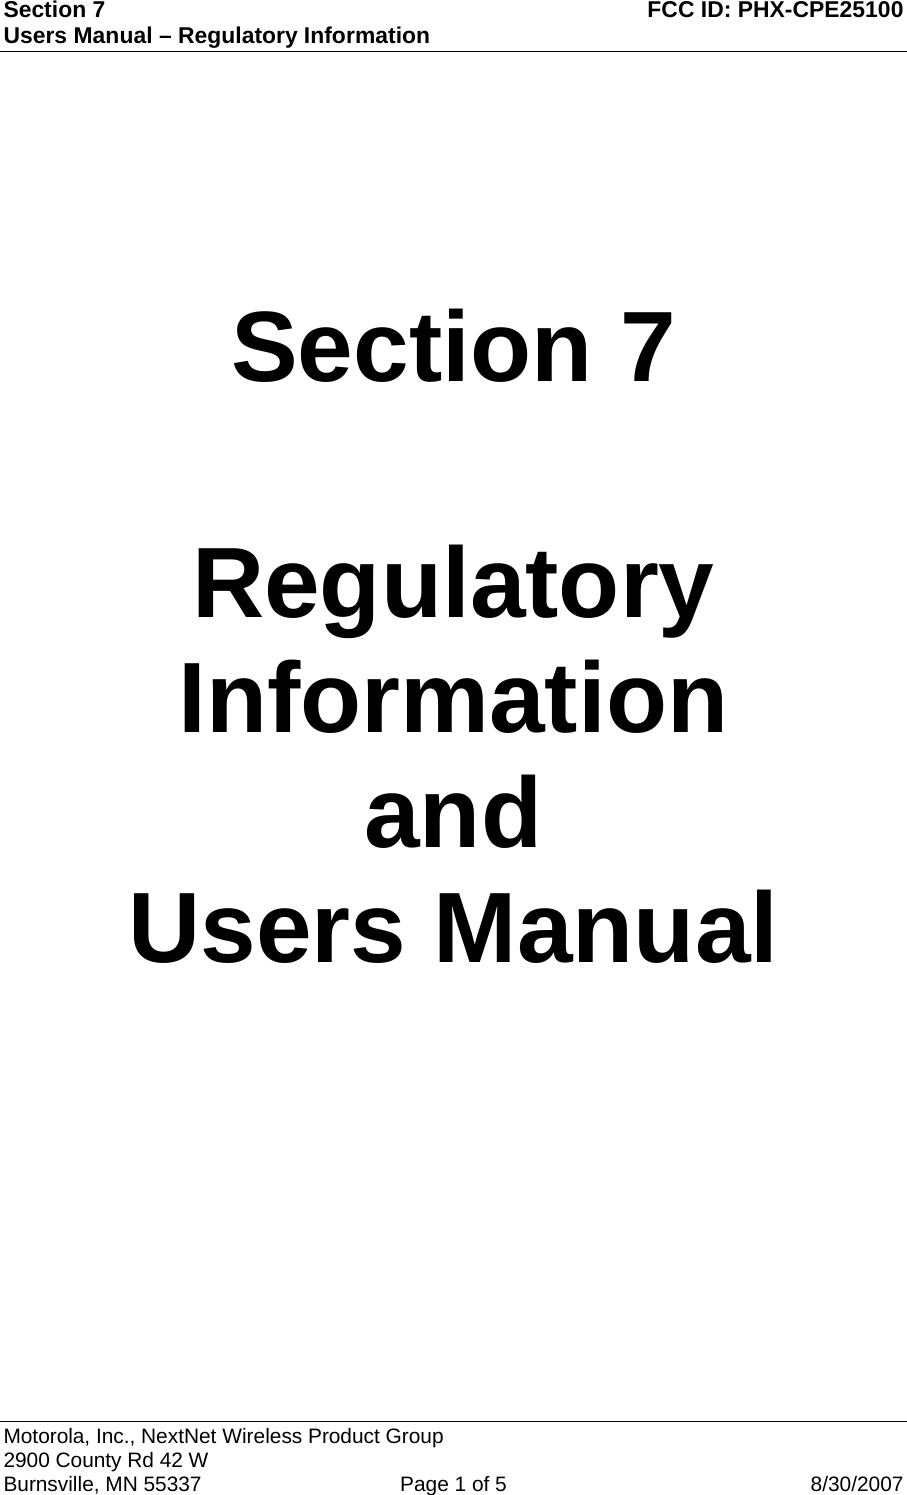 Section 7  FCC ID: PHX-CPE25100 Users Manual – Regulatory Information     Section 7  Regulatory Information and Users Manual  Motorola, Inc., NextNet Wireless Product Group  2900 County Rd 42 W Burnsville, MN 55337   Page 1 of 5  8/30/2007 